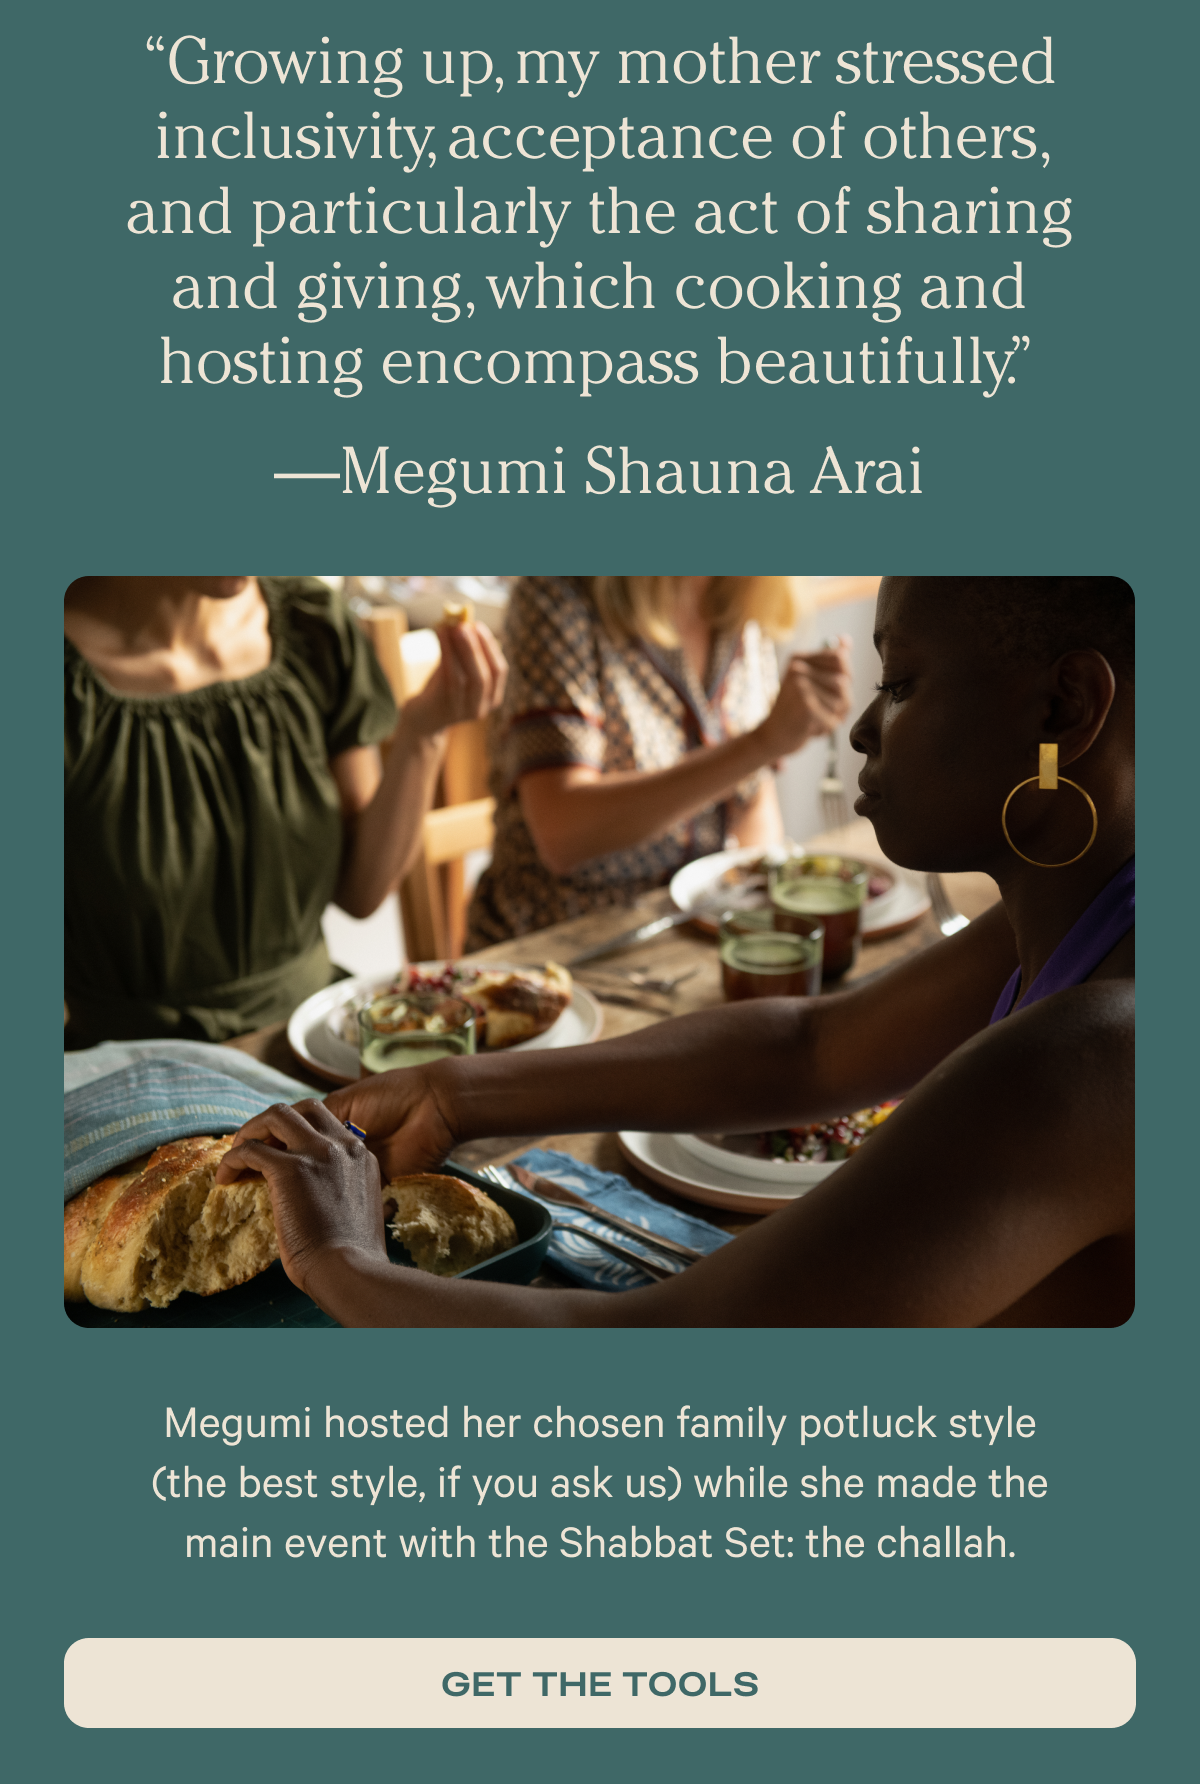 “Growing up, my mother stressed inclusivity, acceptance of others, and particularly the act of sharing and giving, which cooking and hosting encompass beautifully.” —Megumi Shauna Arai - Megumi hosted her chosen family potluck style (the best style, if you ask us) while she made the main event with the Shabbat Set: the challah. - Get the tools